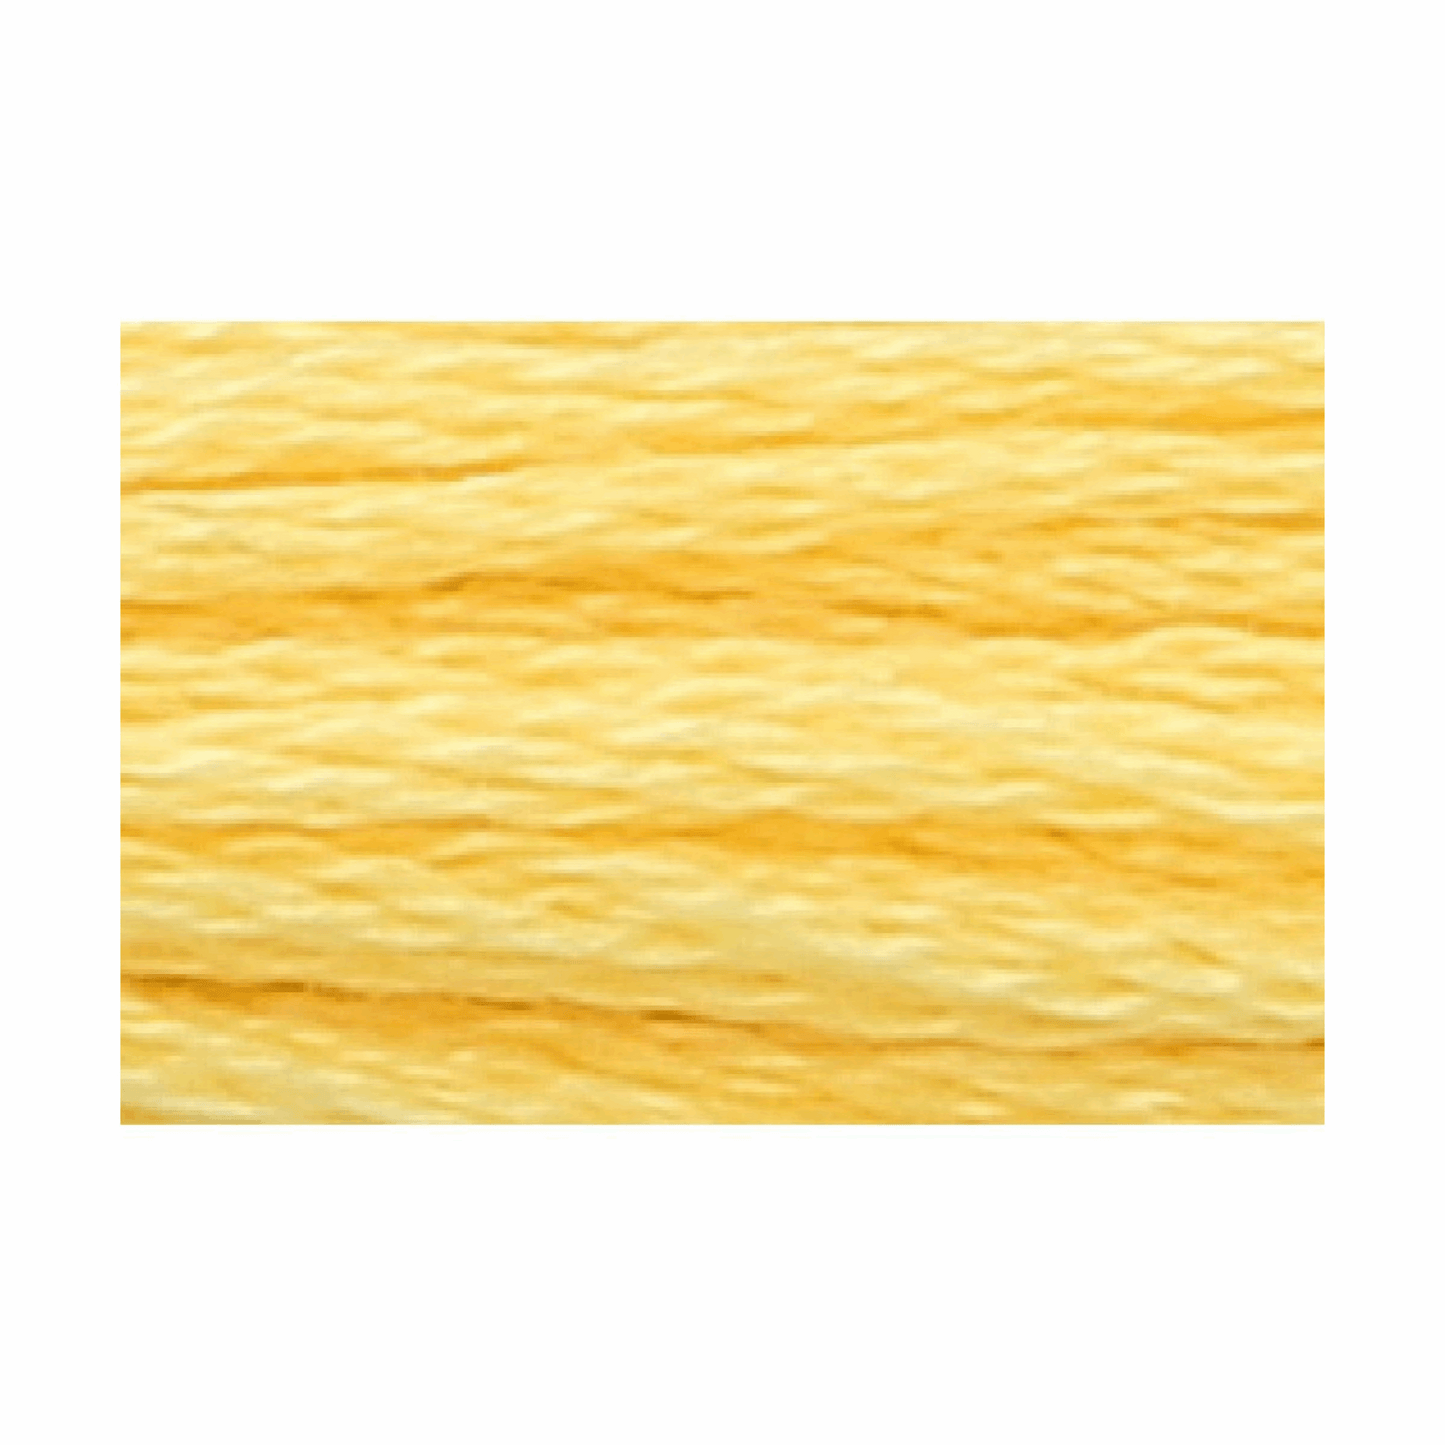 Anchor matt embroidery thread 10m, 5 times lightly twisted, color yellow 295